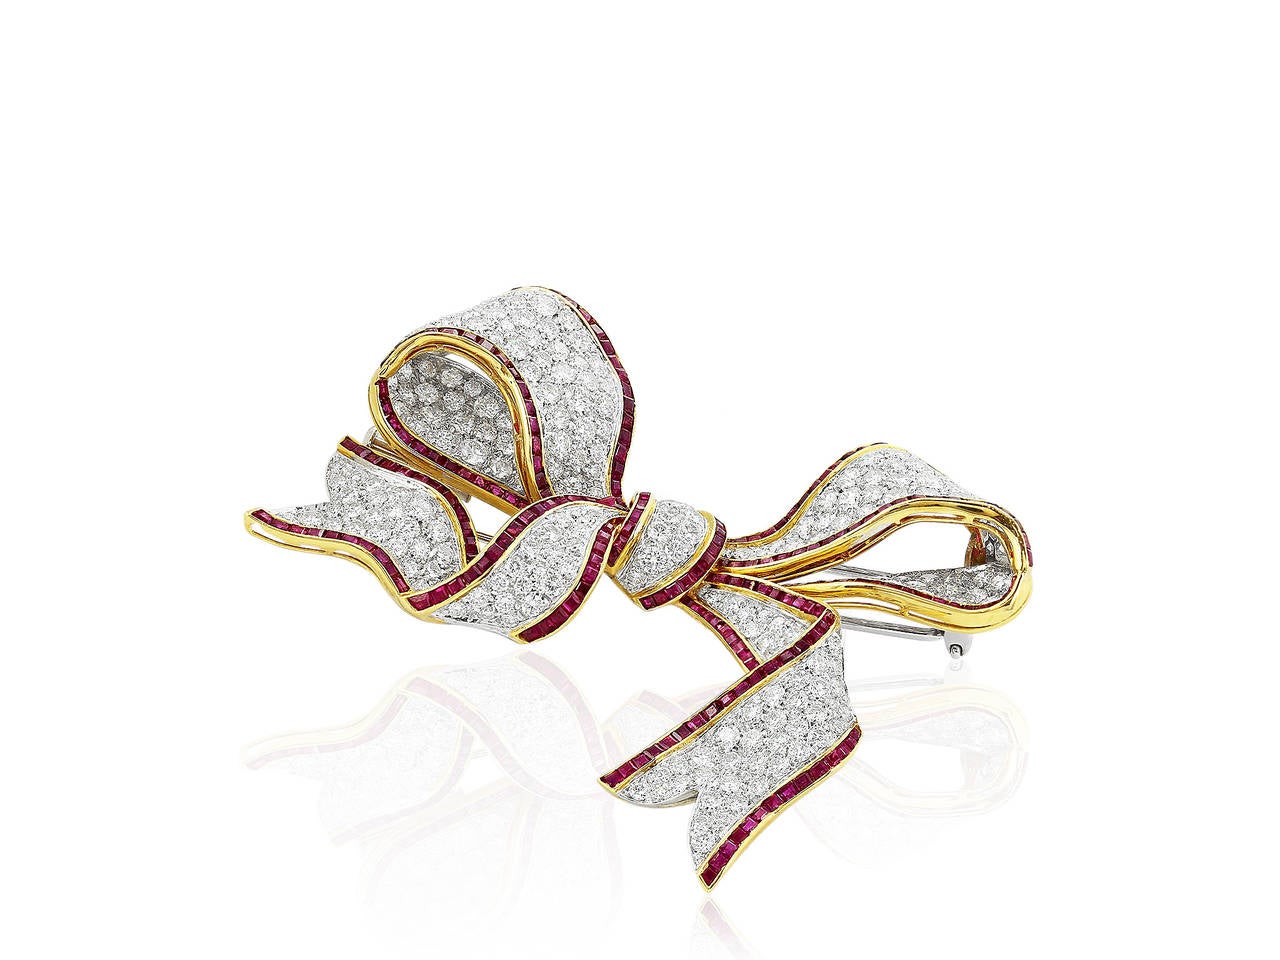 Two tone 18 karat yellow and white gold bow pin consisting of approximately 8.00 carats total weight set with custom cut ruby accents.